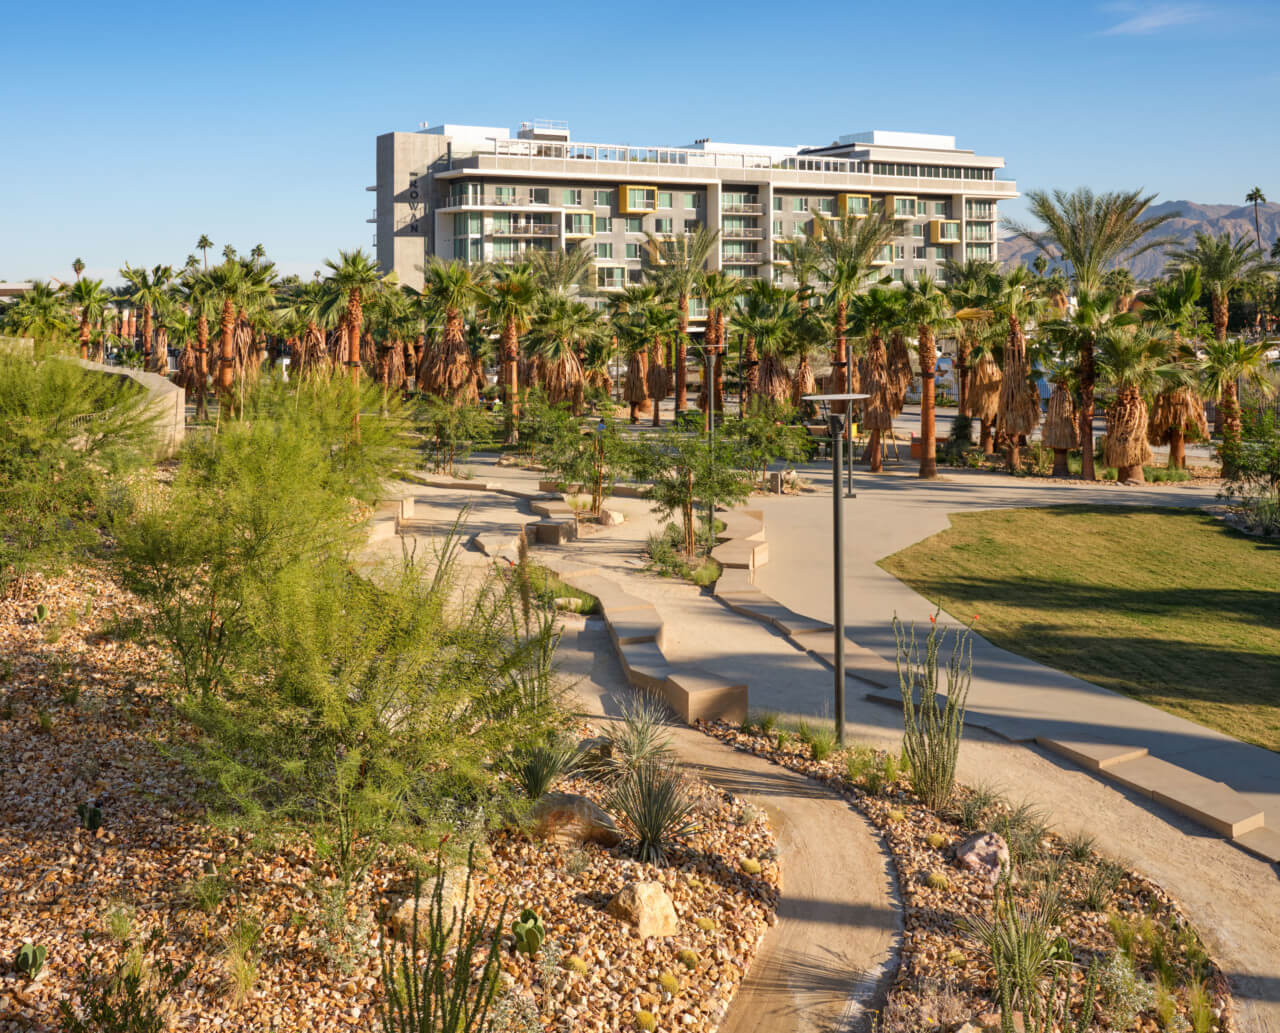 pathways in a desert park with palm trees in the background